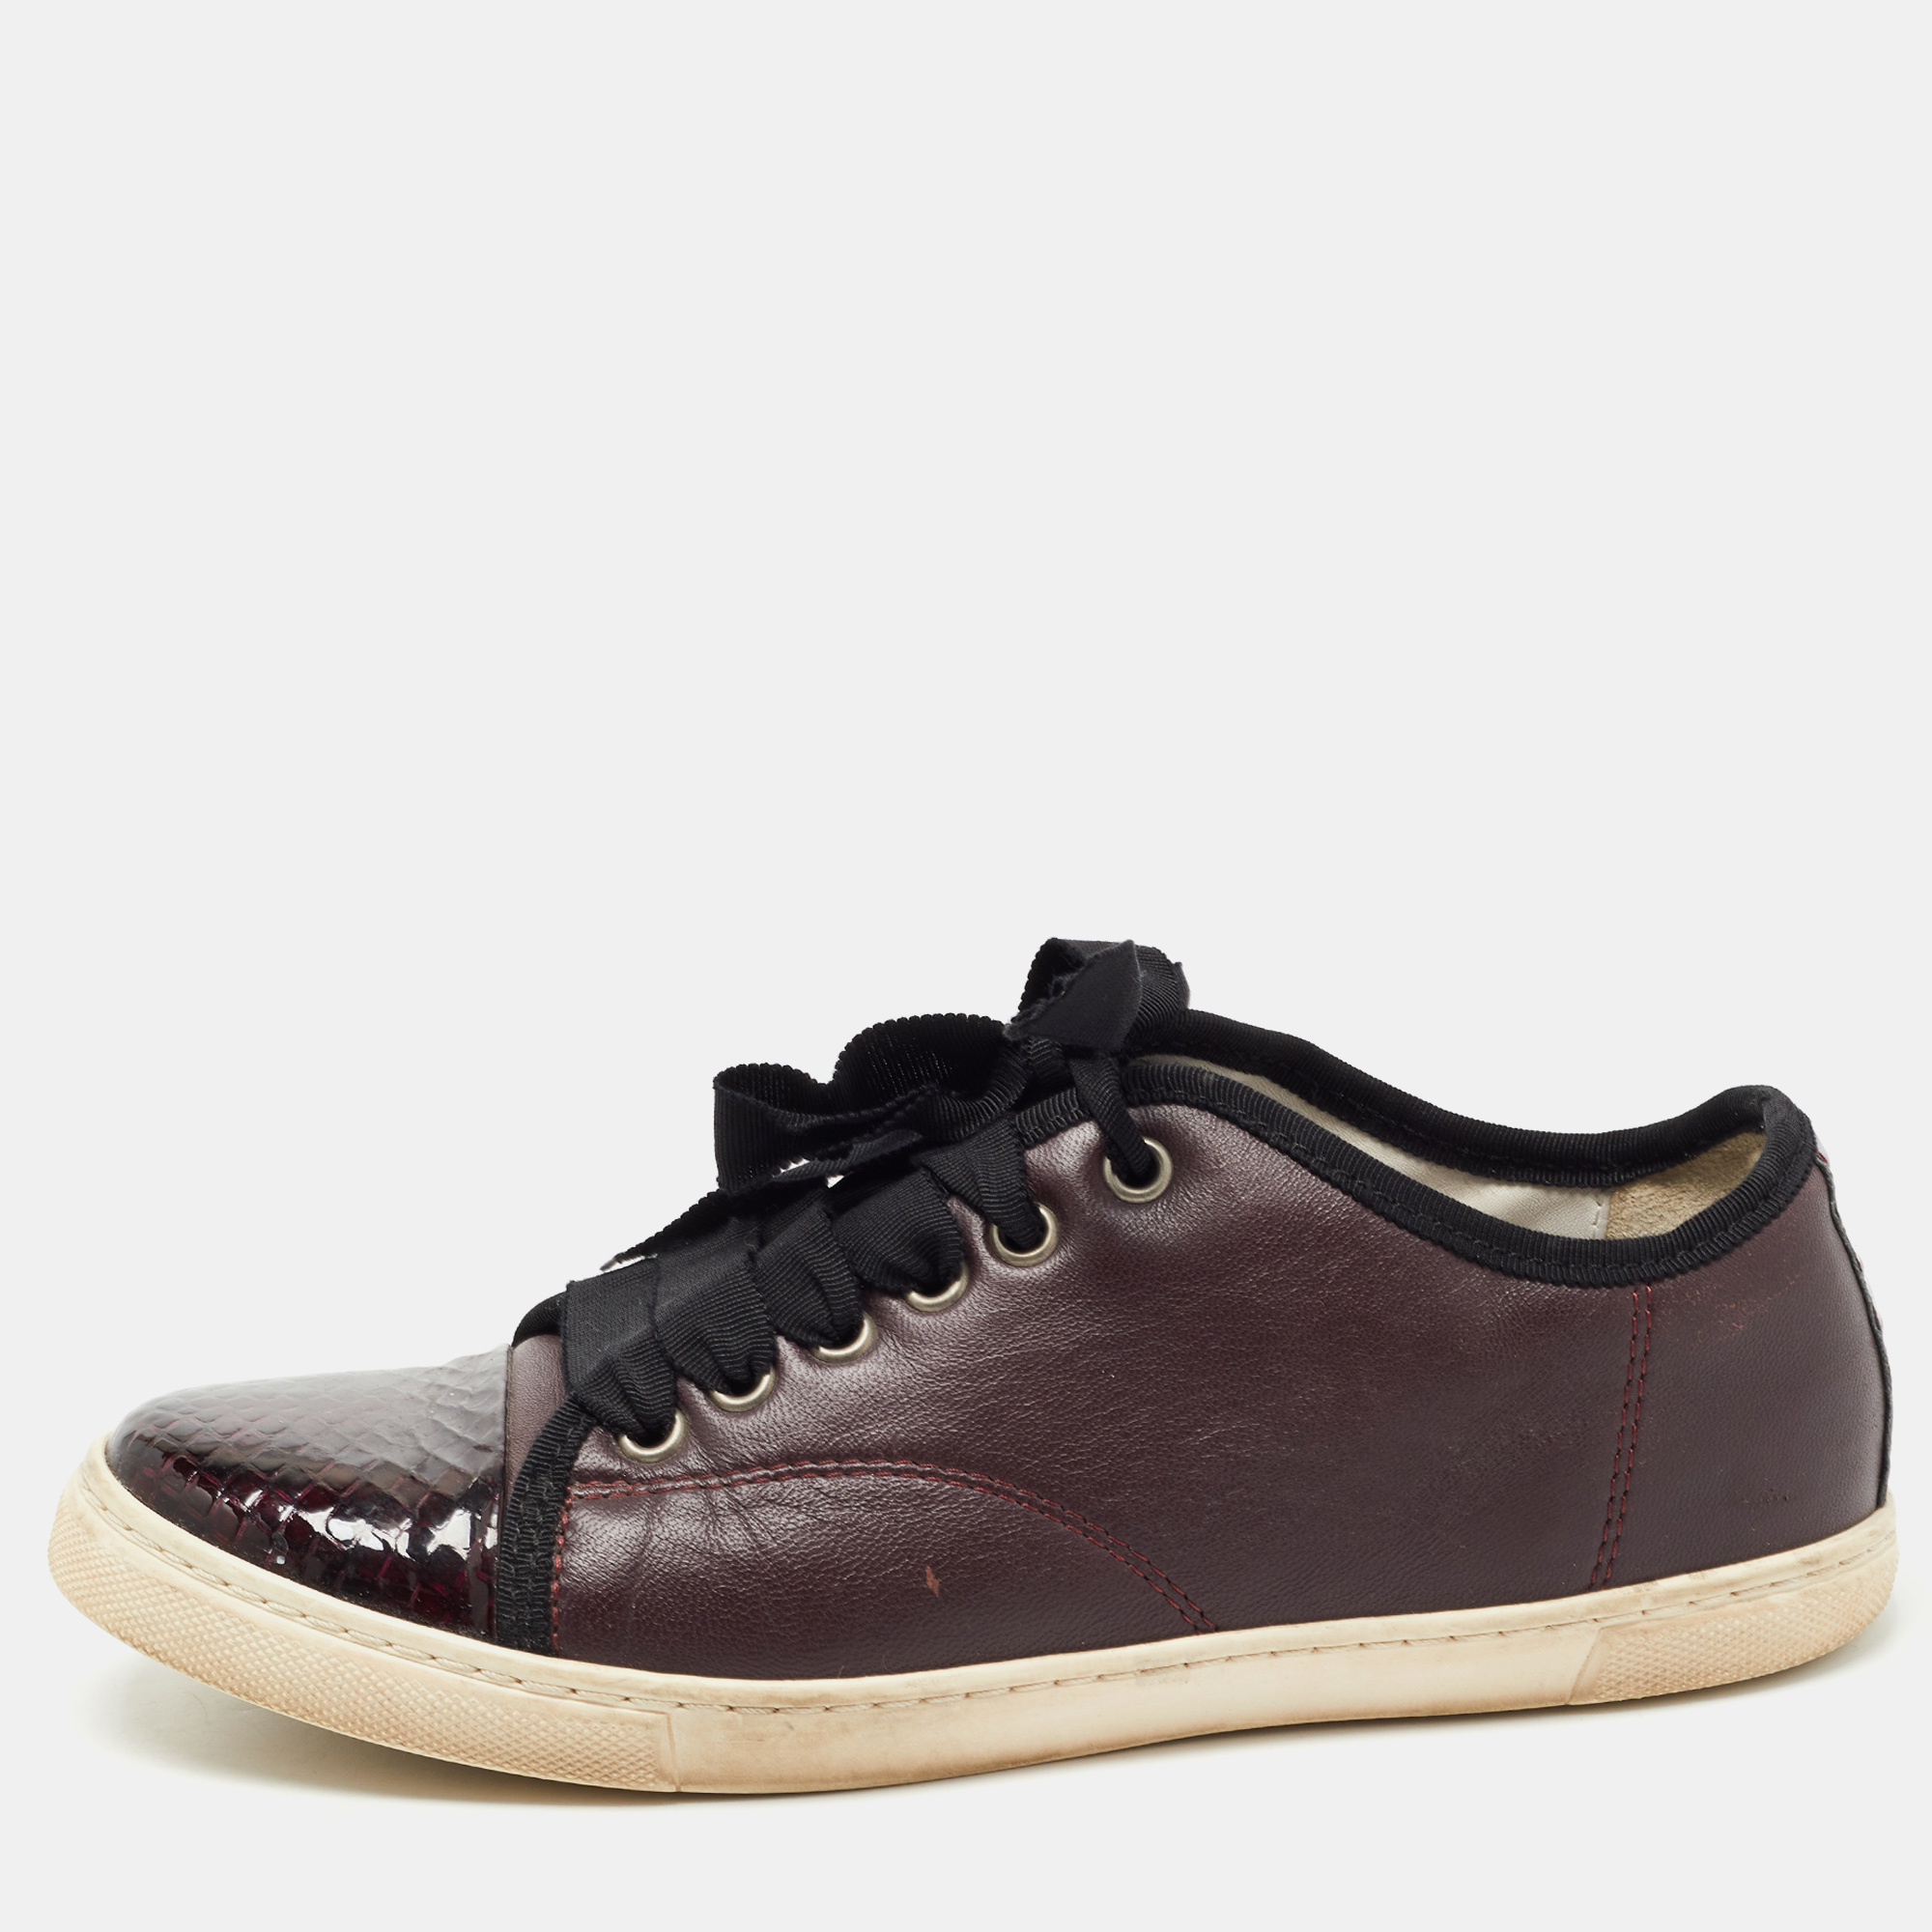 

Lanvin Burgundy Leather and Embossed Python Cap Toe Low Top Sneakers Size